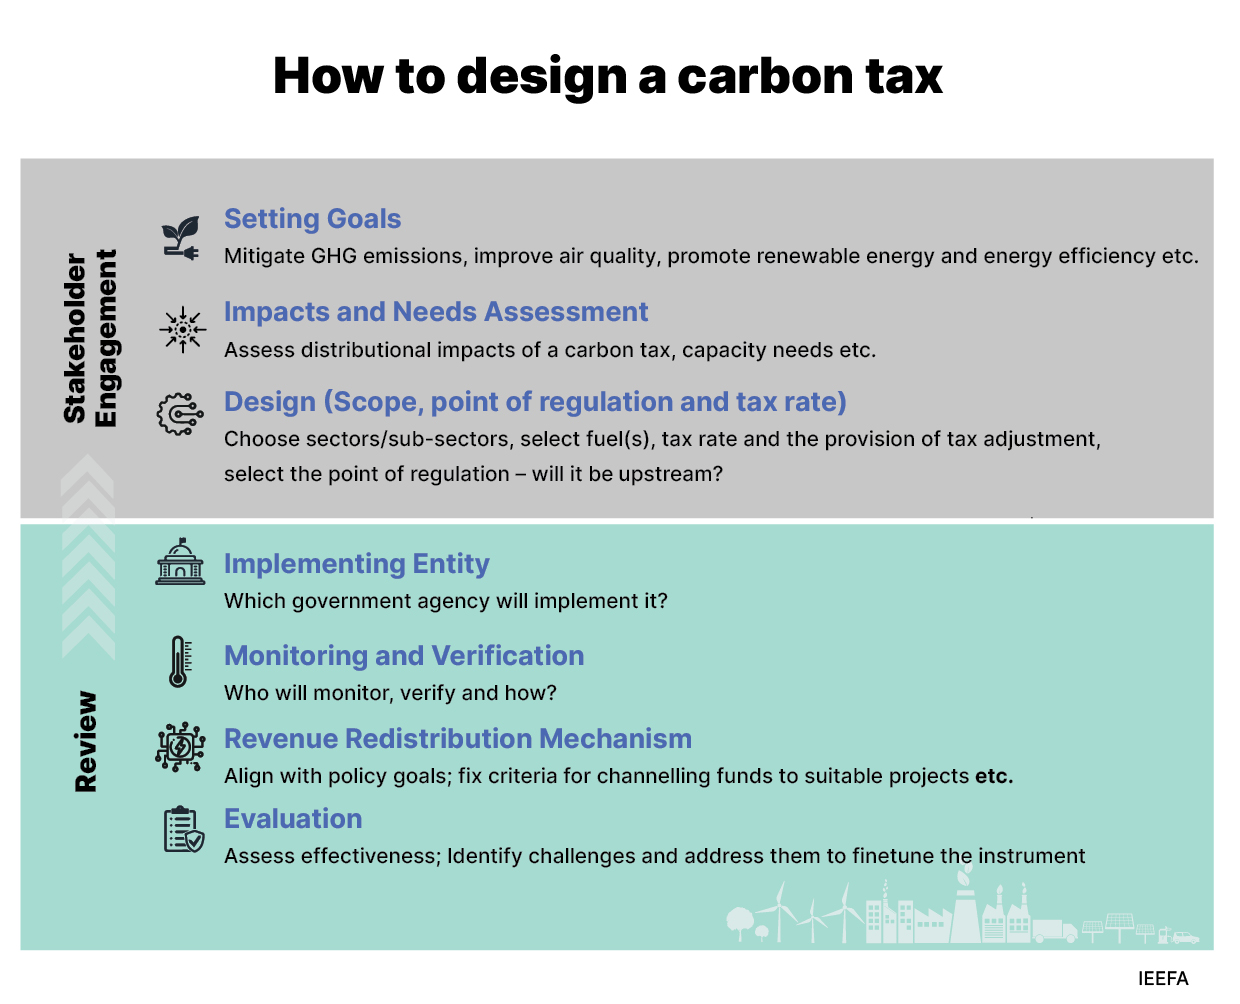 How to structure a carbon tax